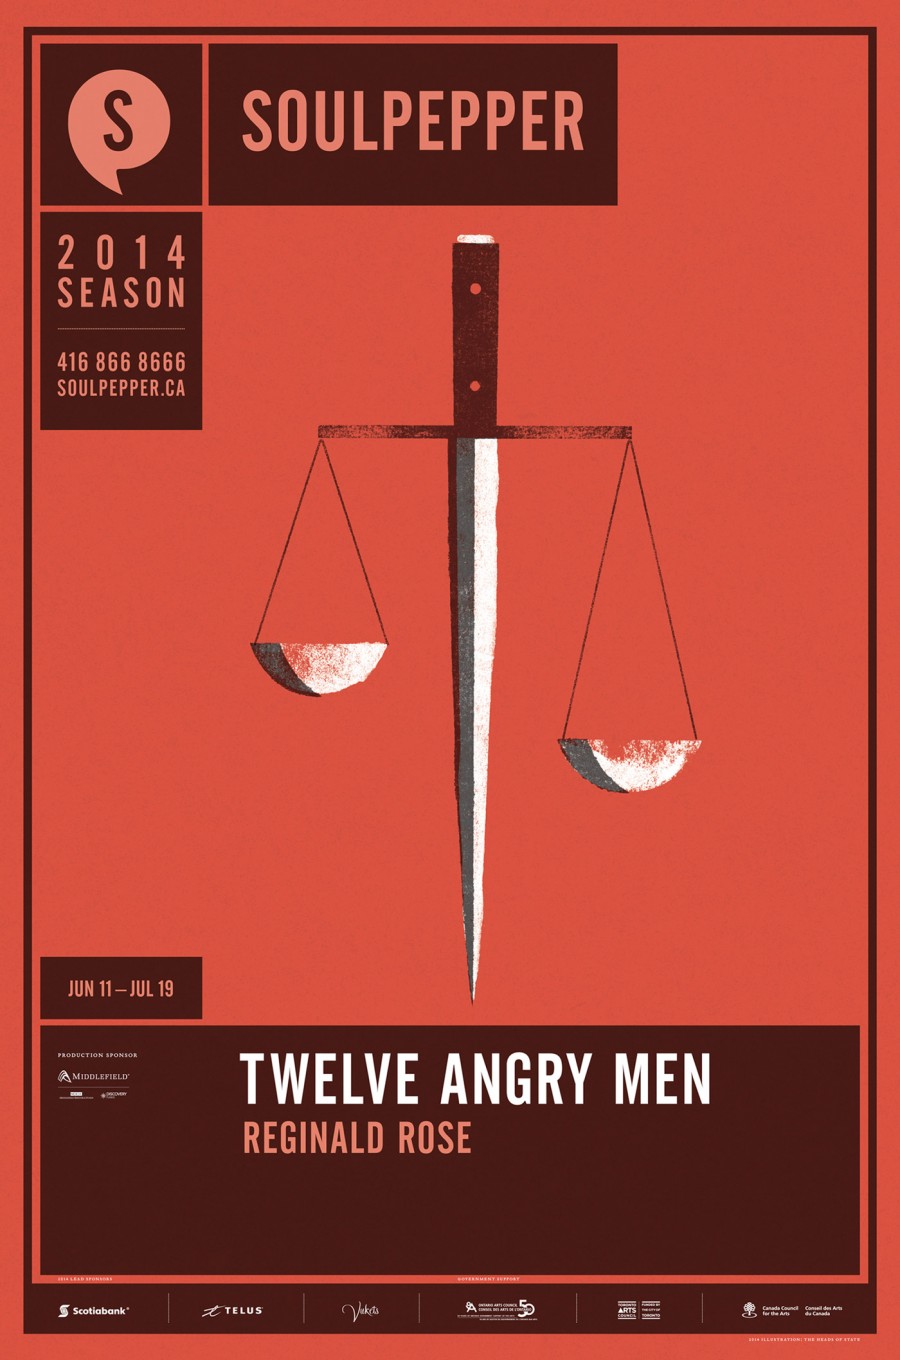 Twelve Angry Men - Soulpepper Theatre - 2014 Season Poster Series - The Heads of State